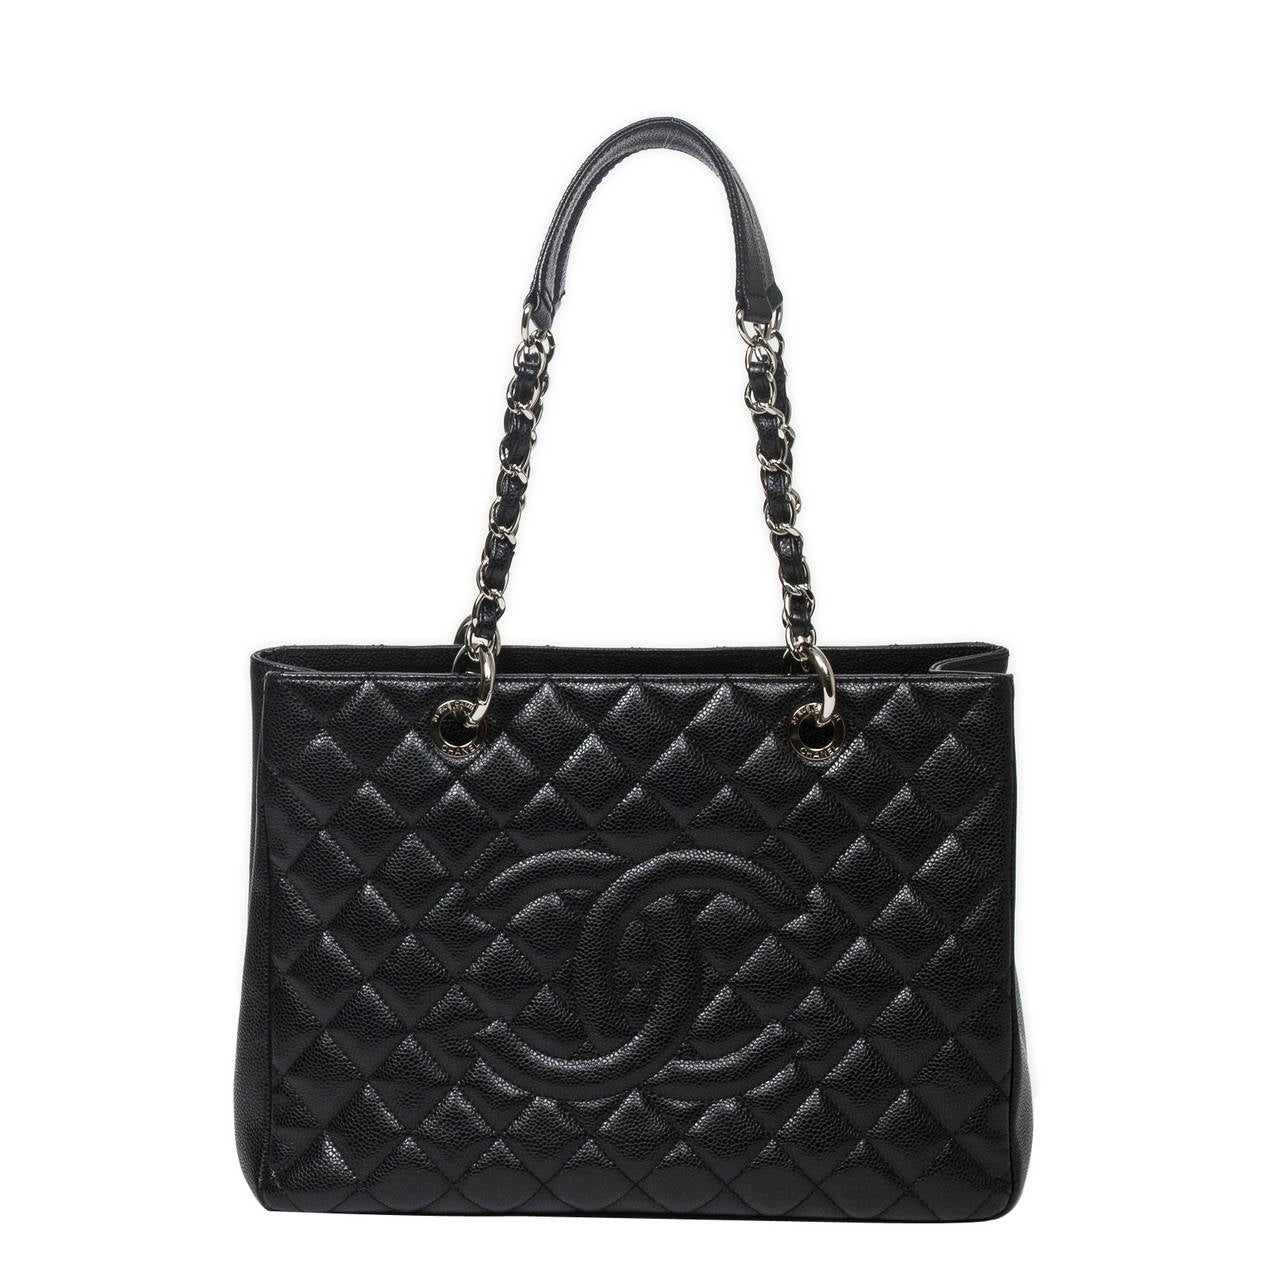 Chanel Gran Tote MM Shopper Black Grained Leather For Sale